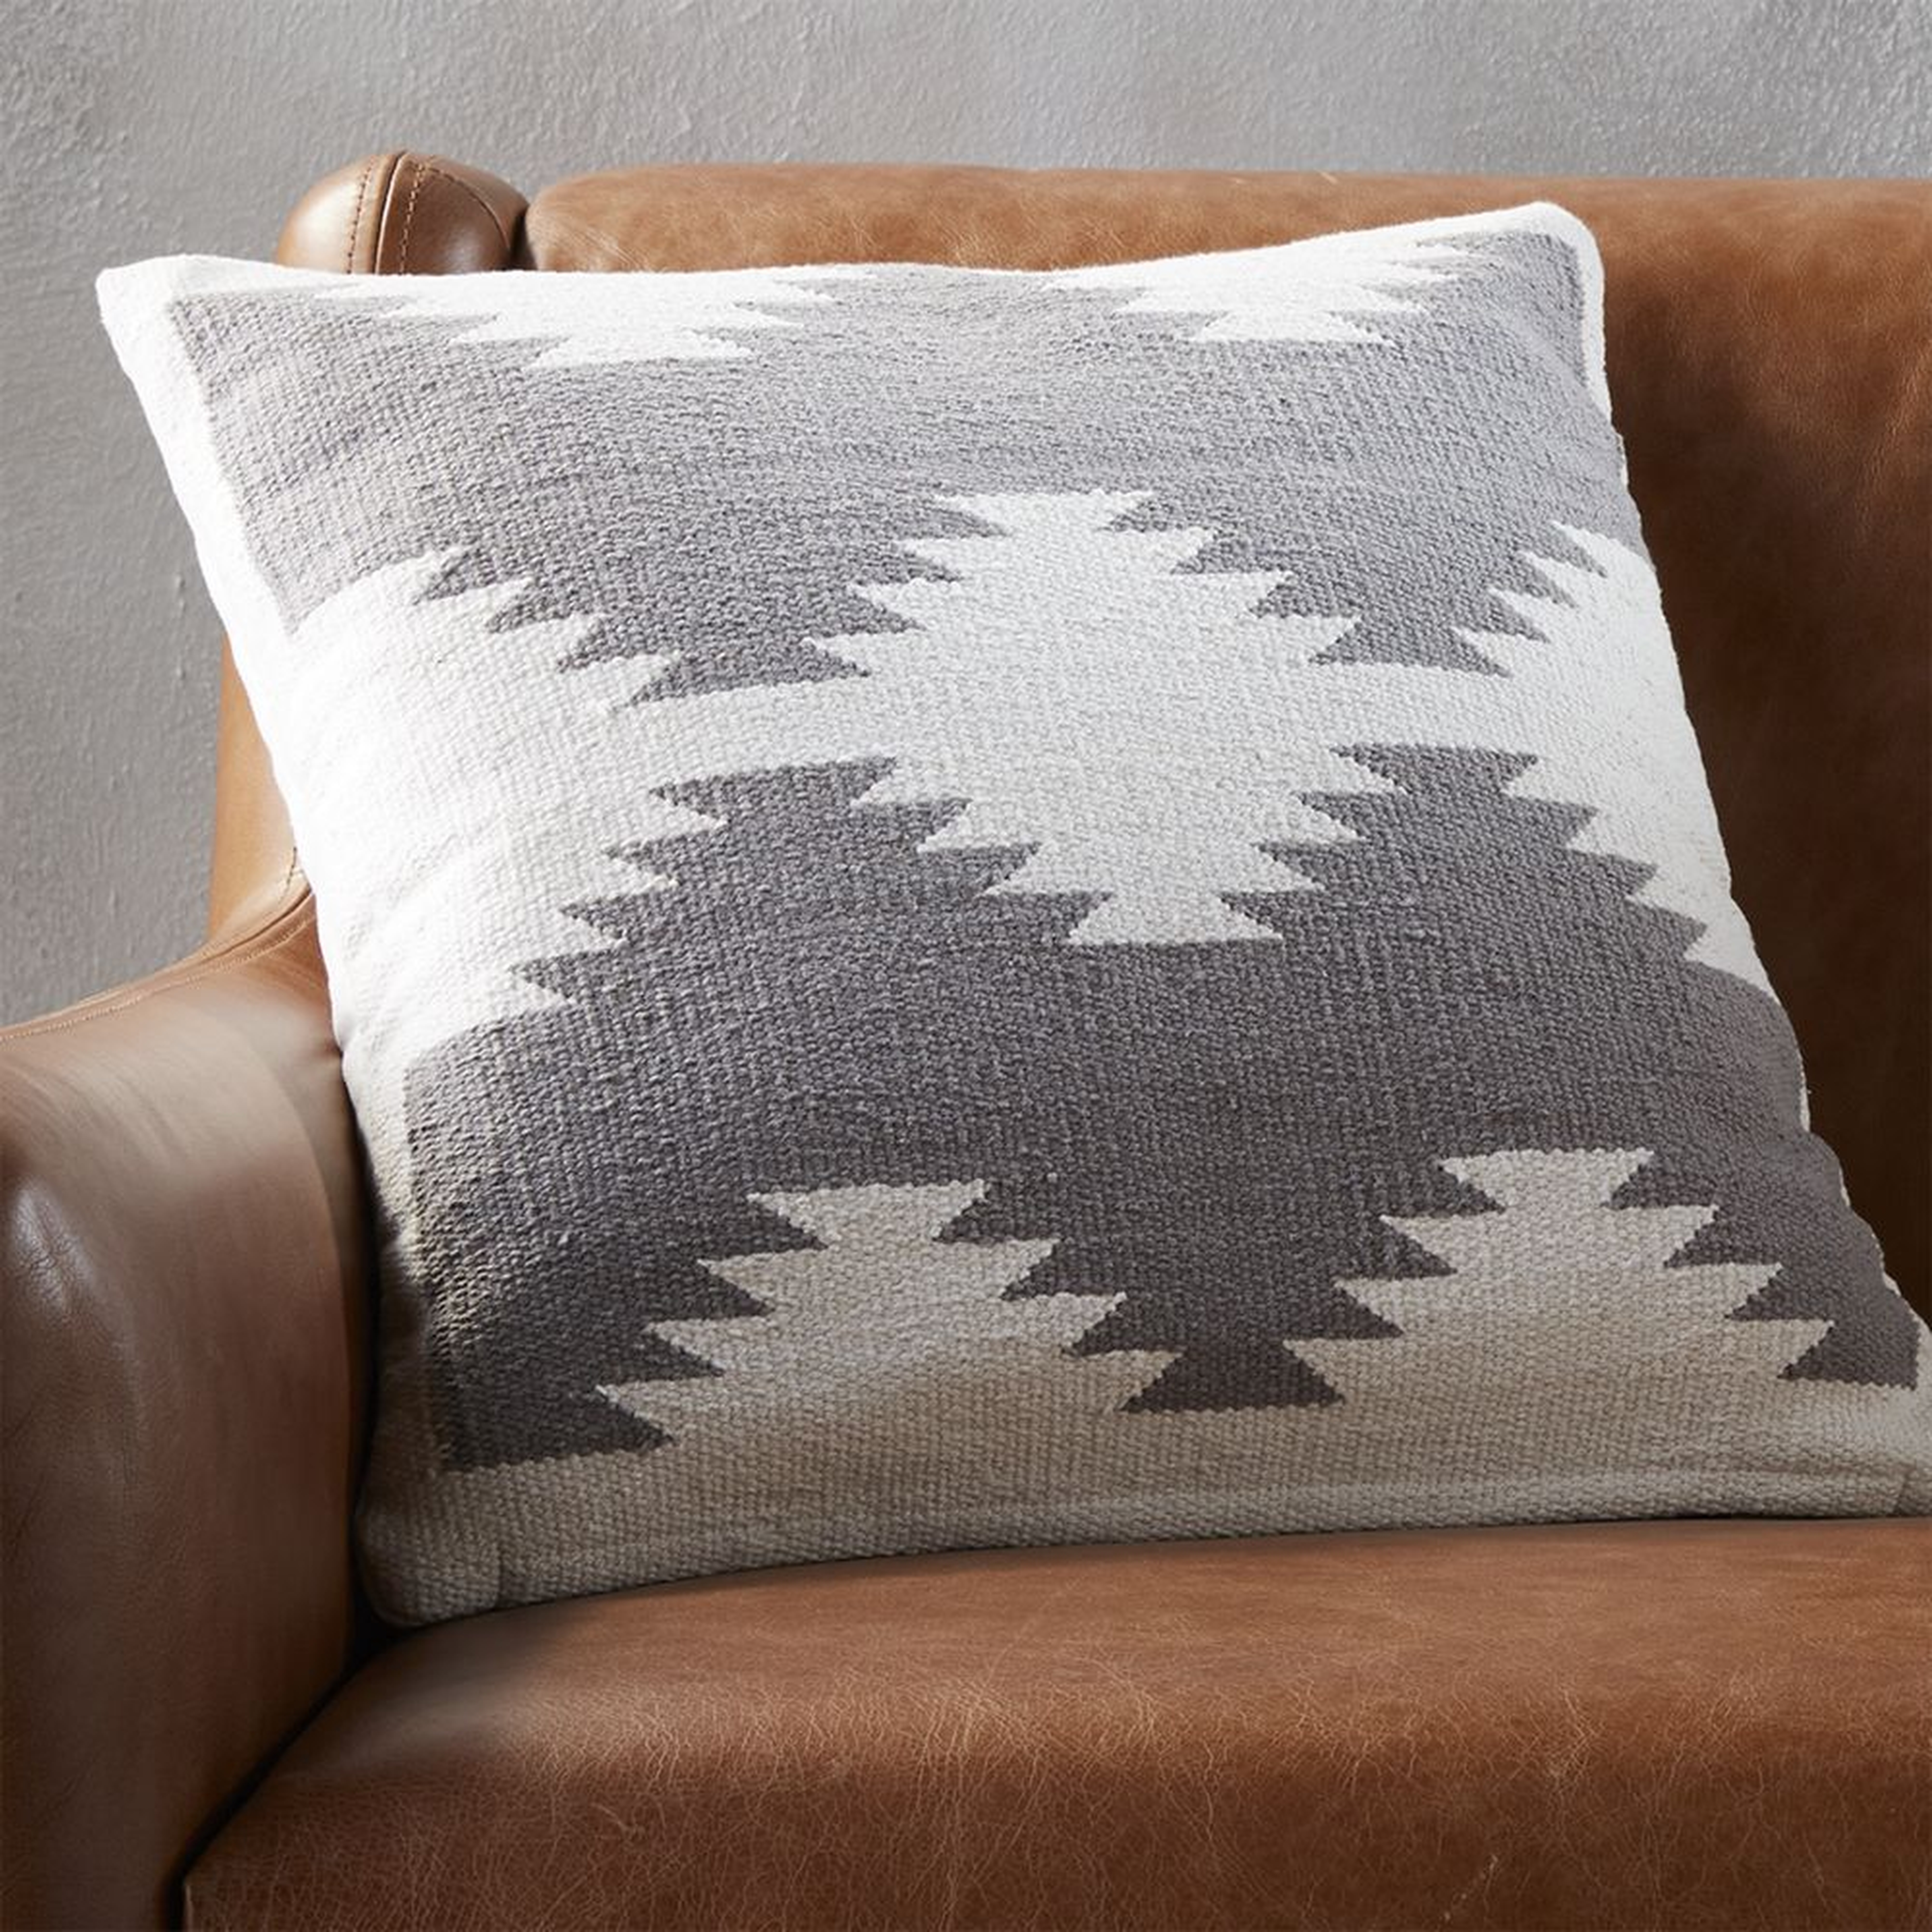 18" tecca pillow with feather-down insert - CB2